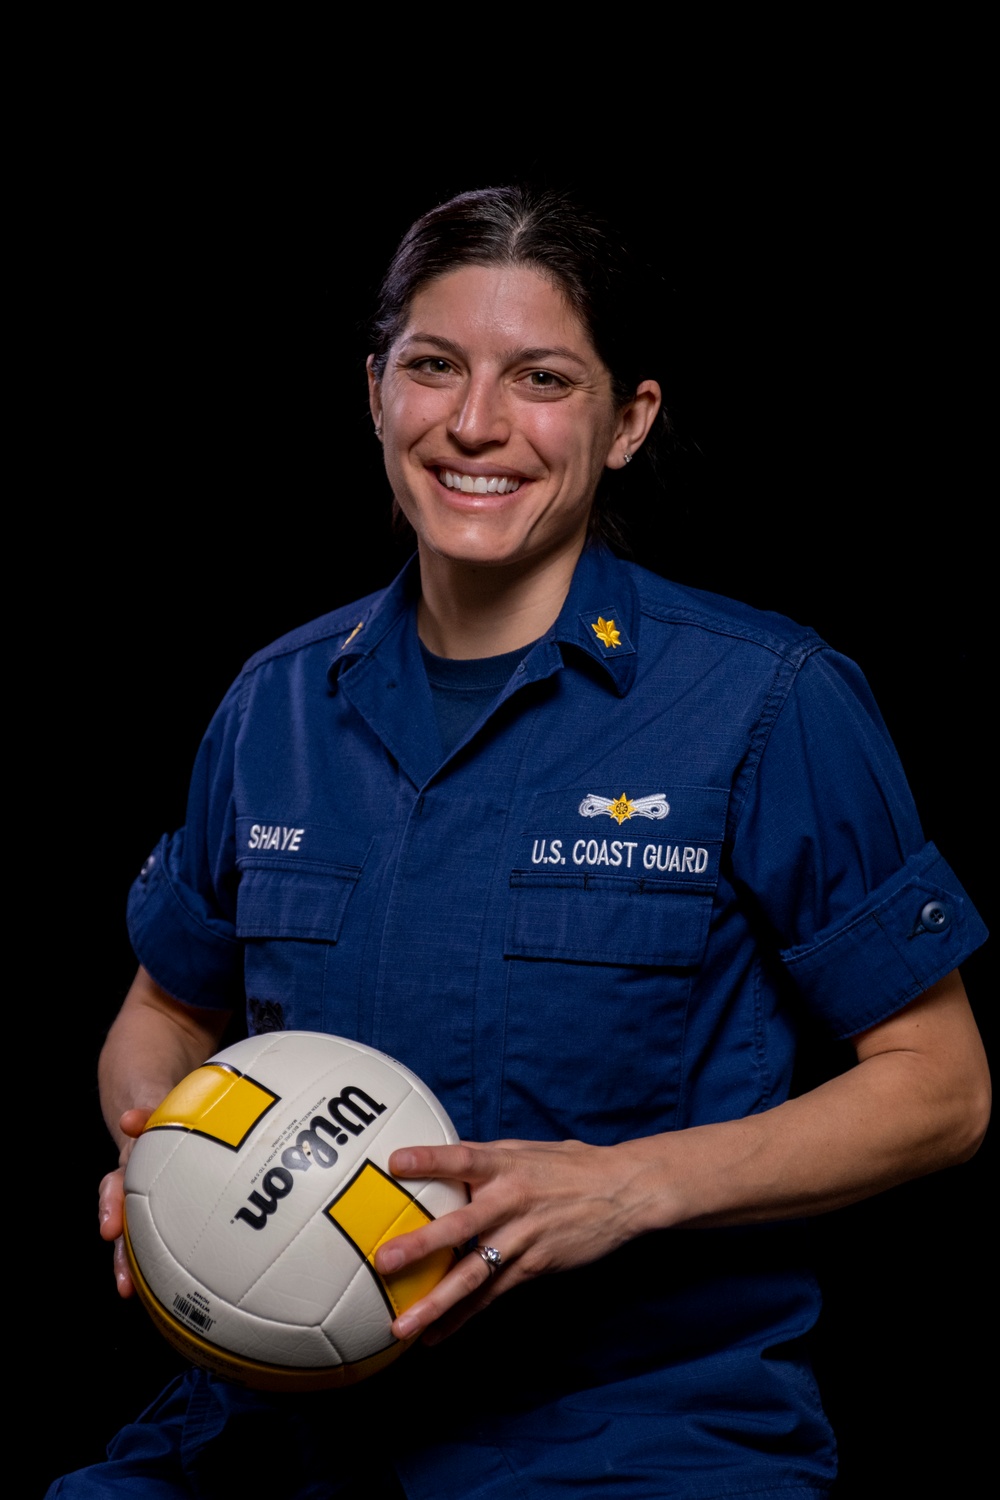 San Francisco Bay Area Coast Guard members recognize National Student-Athlete Day